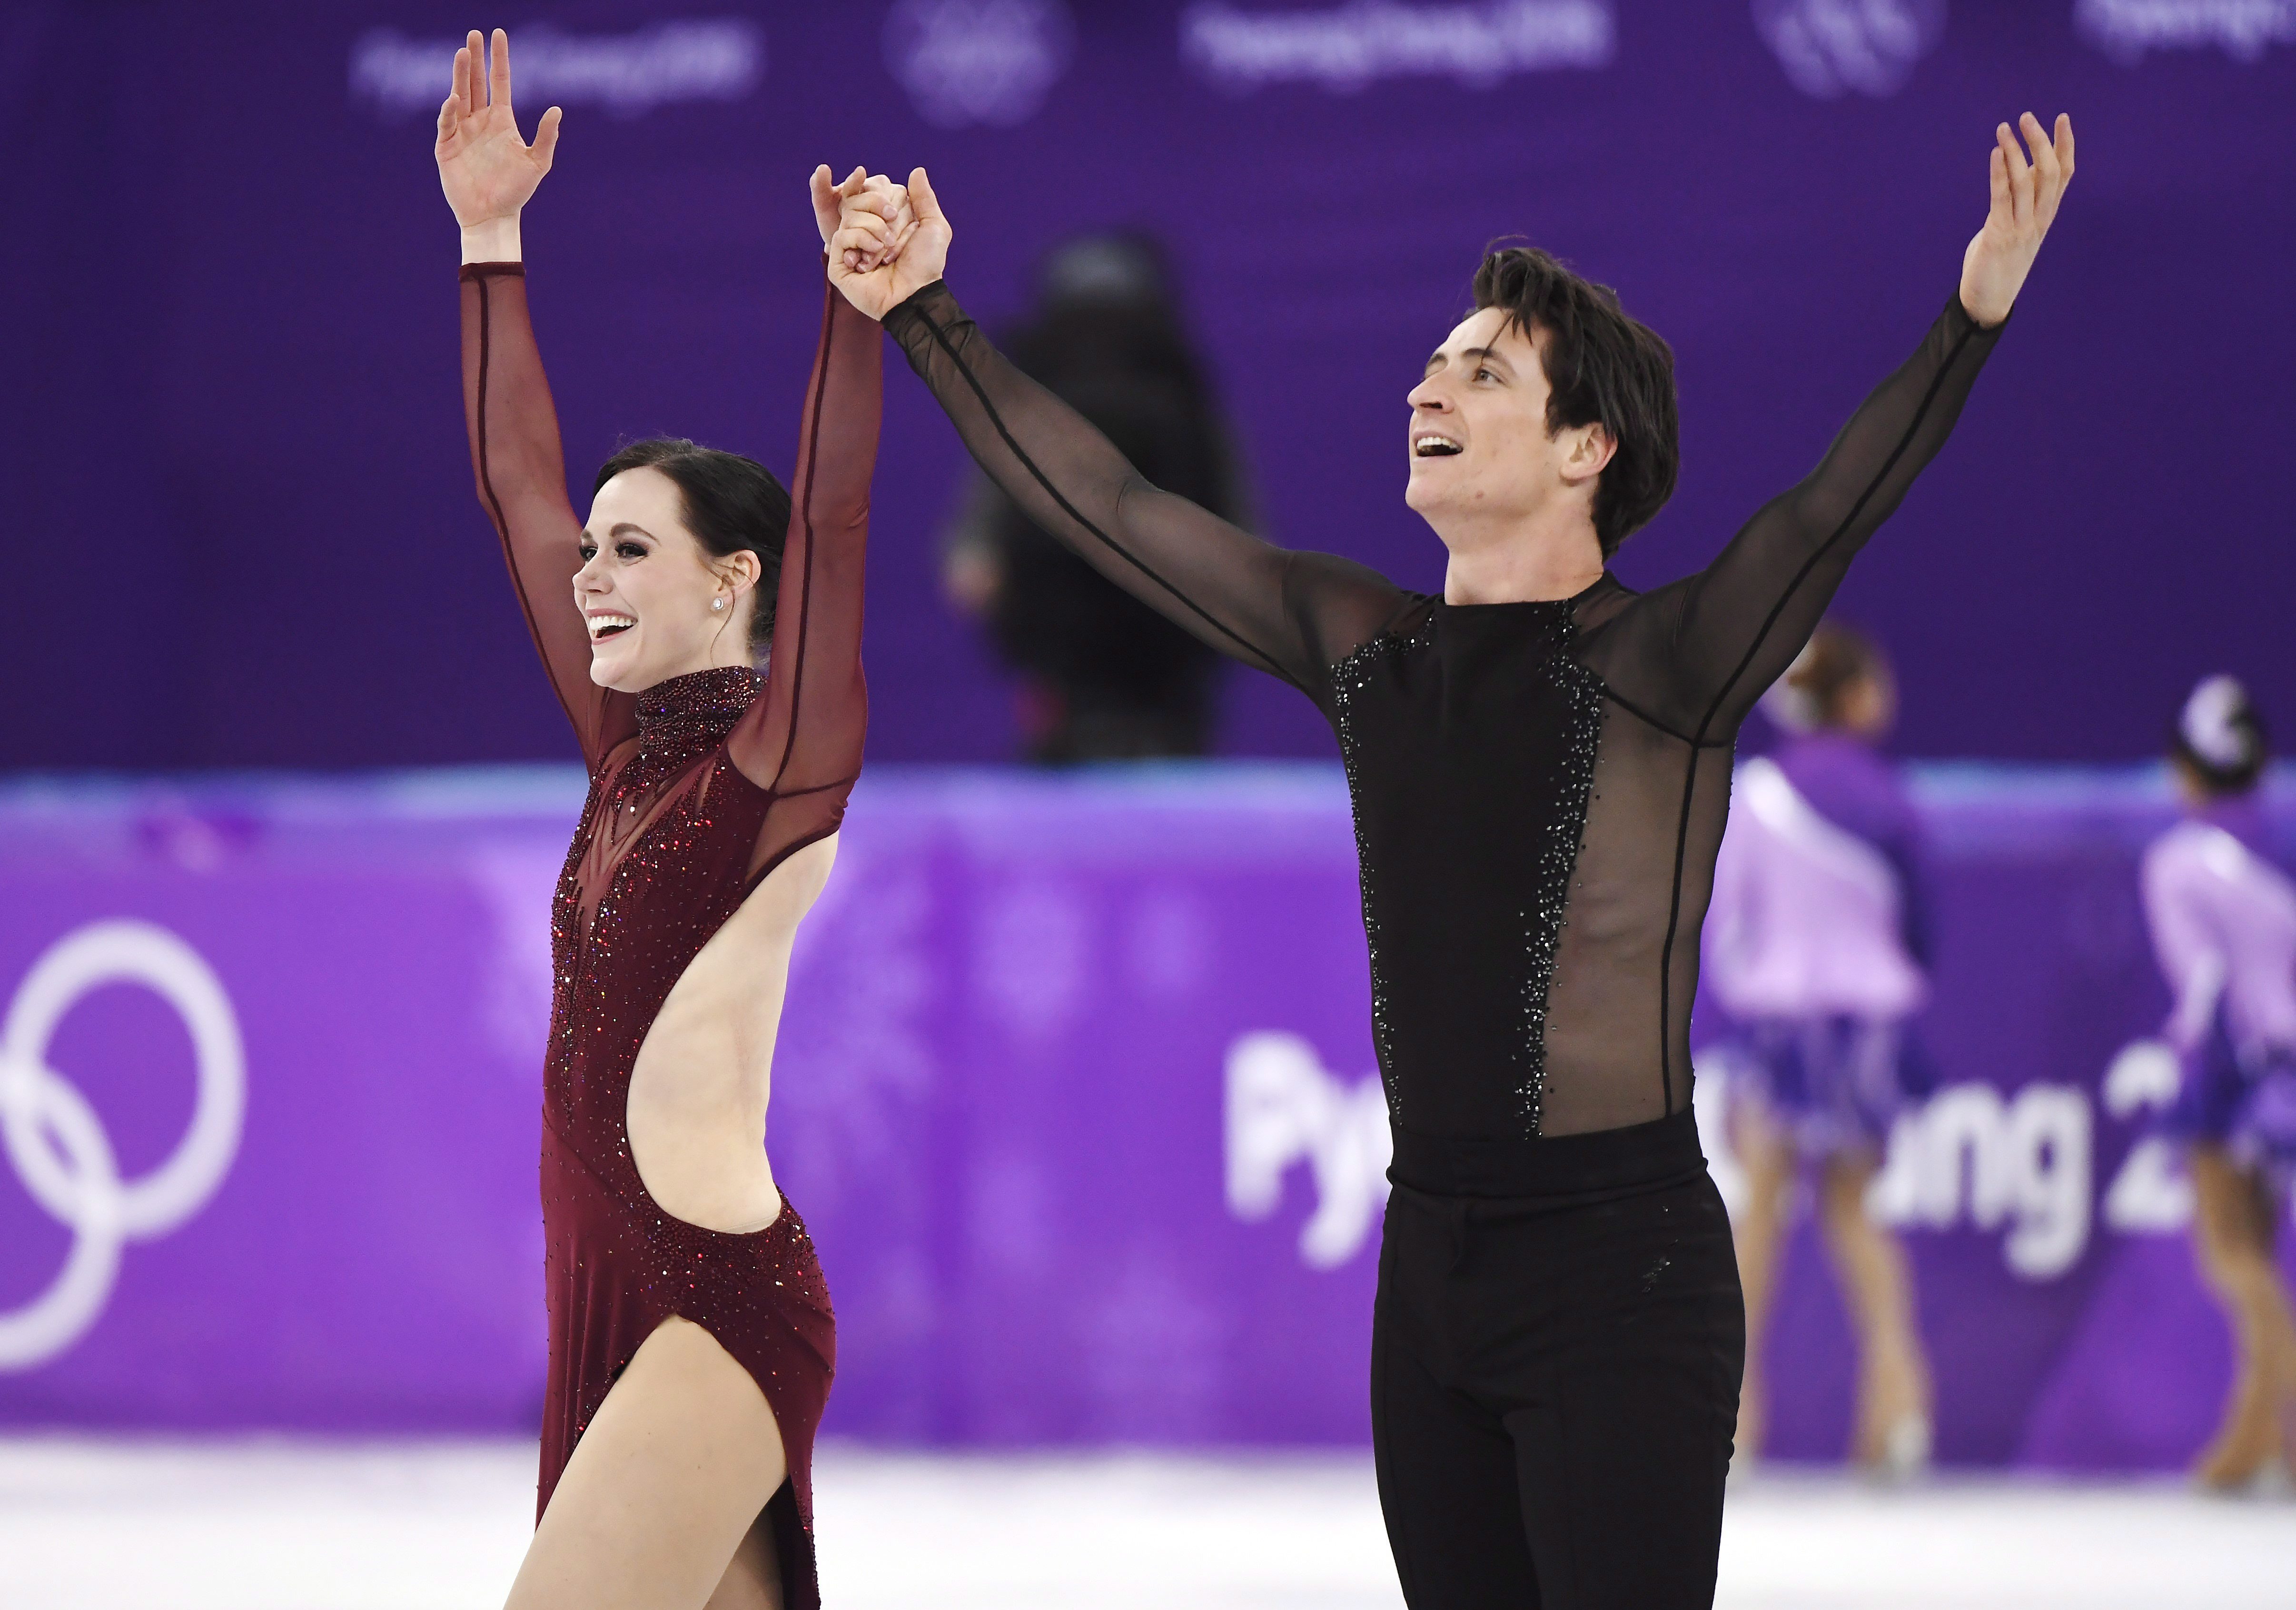 Tessa Virtue and Scott Moir win second Olympic ice dance gold